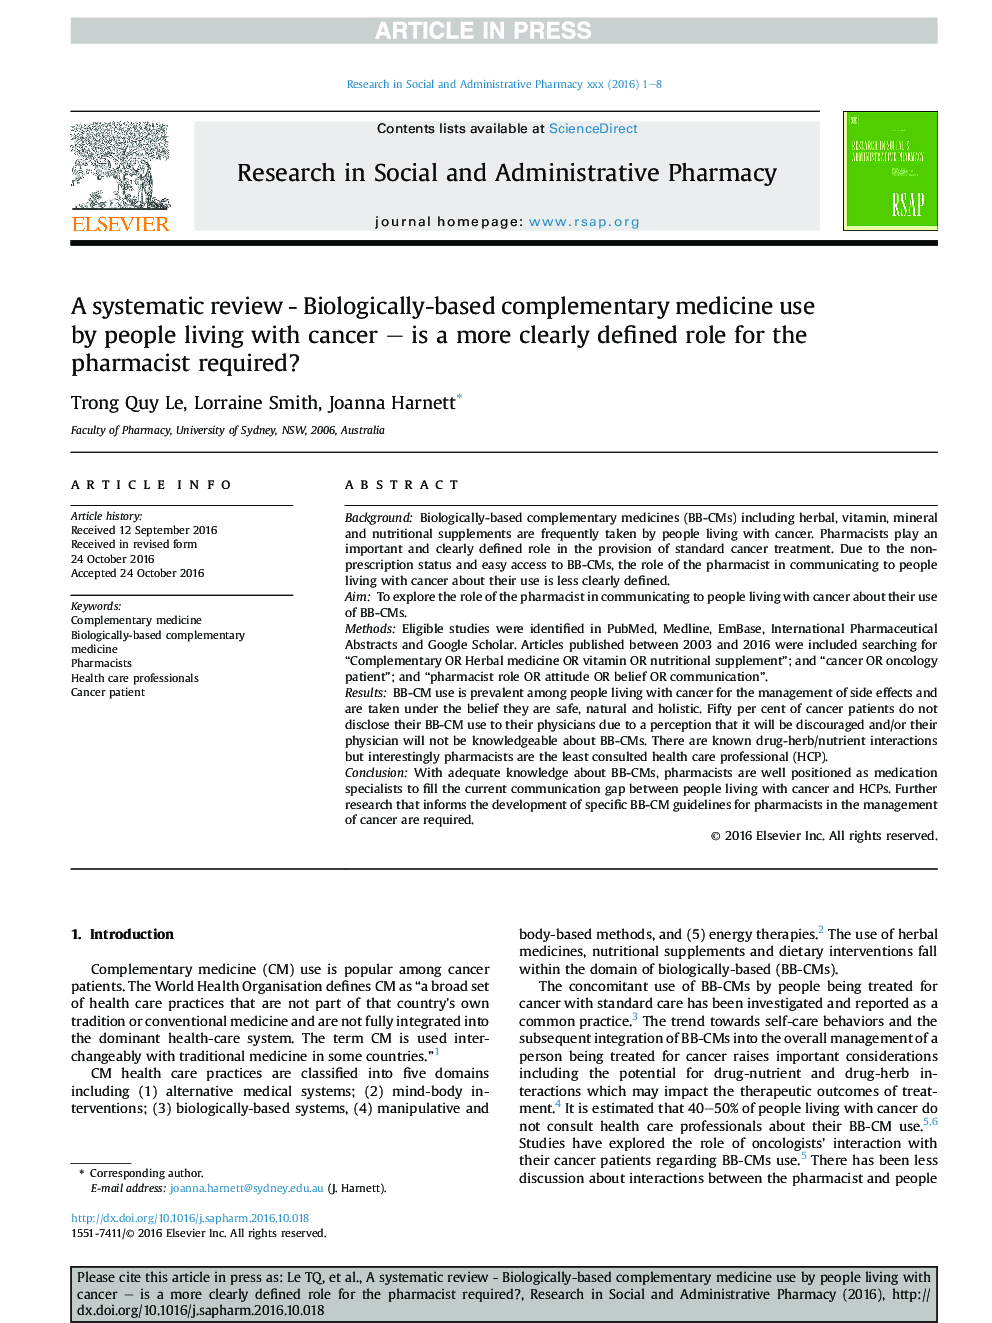 A systematic review - Biologically-based complementary medicine use by people living with cancer - is a more clearly defined role for the pharmacist required?